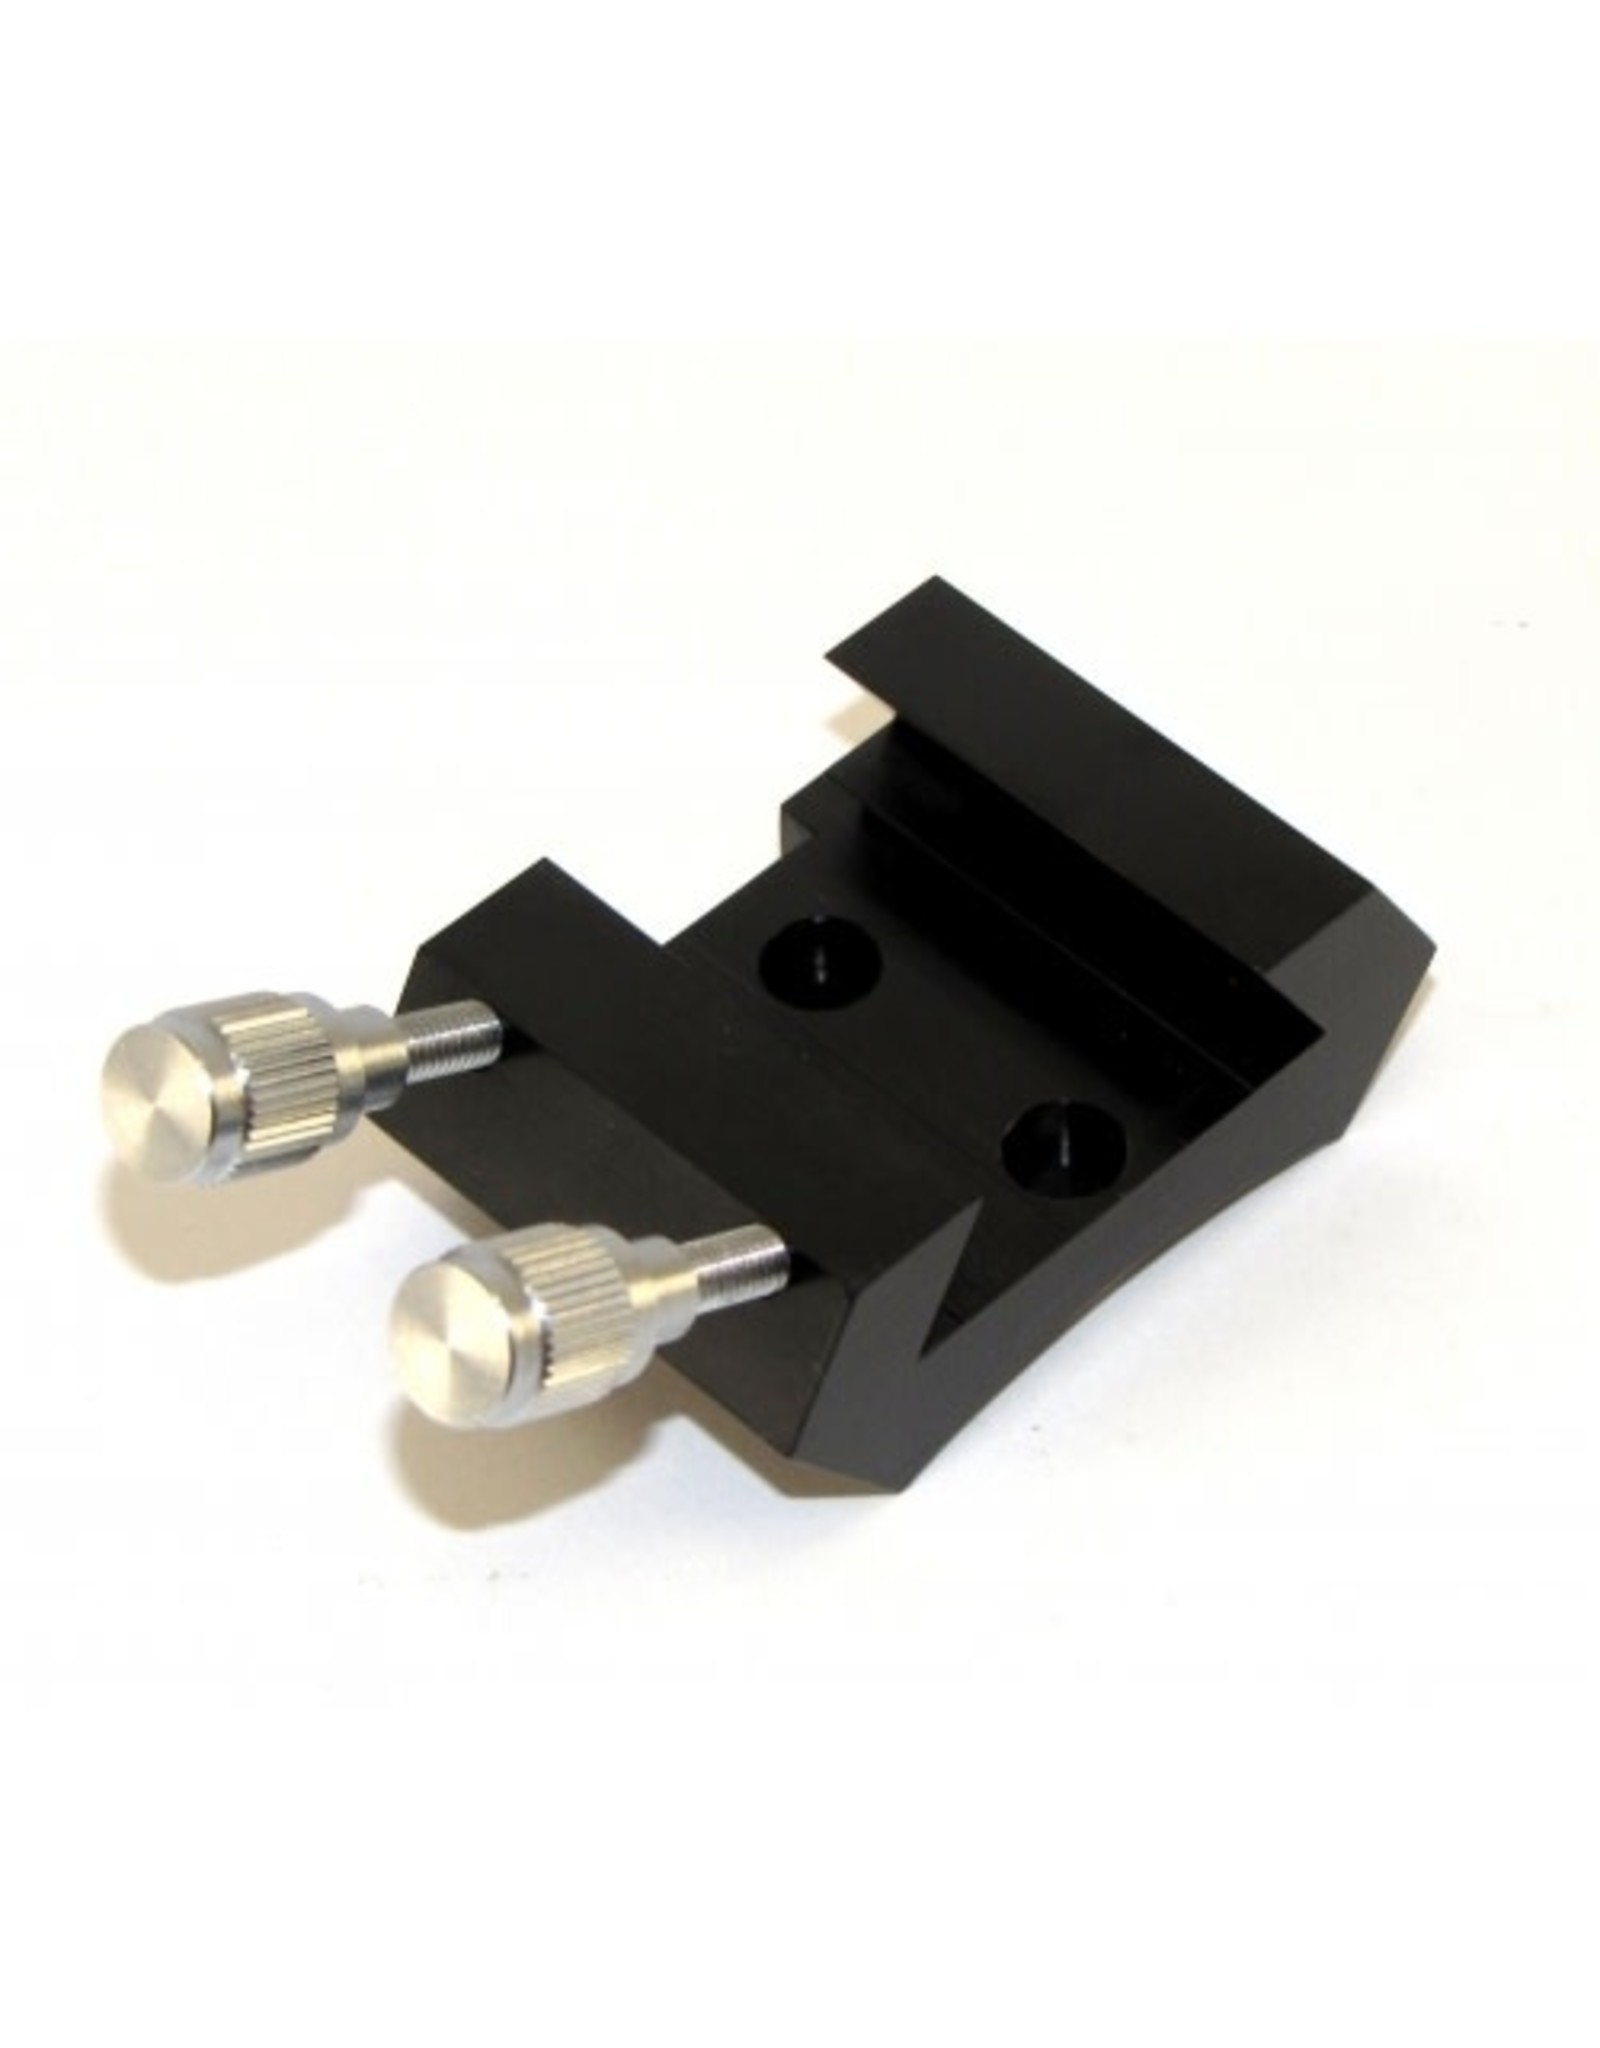 Feathertouch Feathertouch FSB-CH-BRACKET--Mounting Bracket for FSB-CH4055 Finderscope